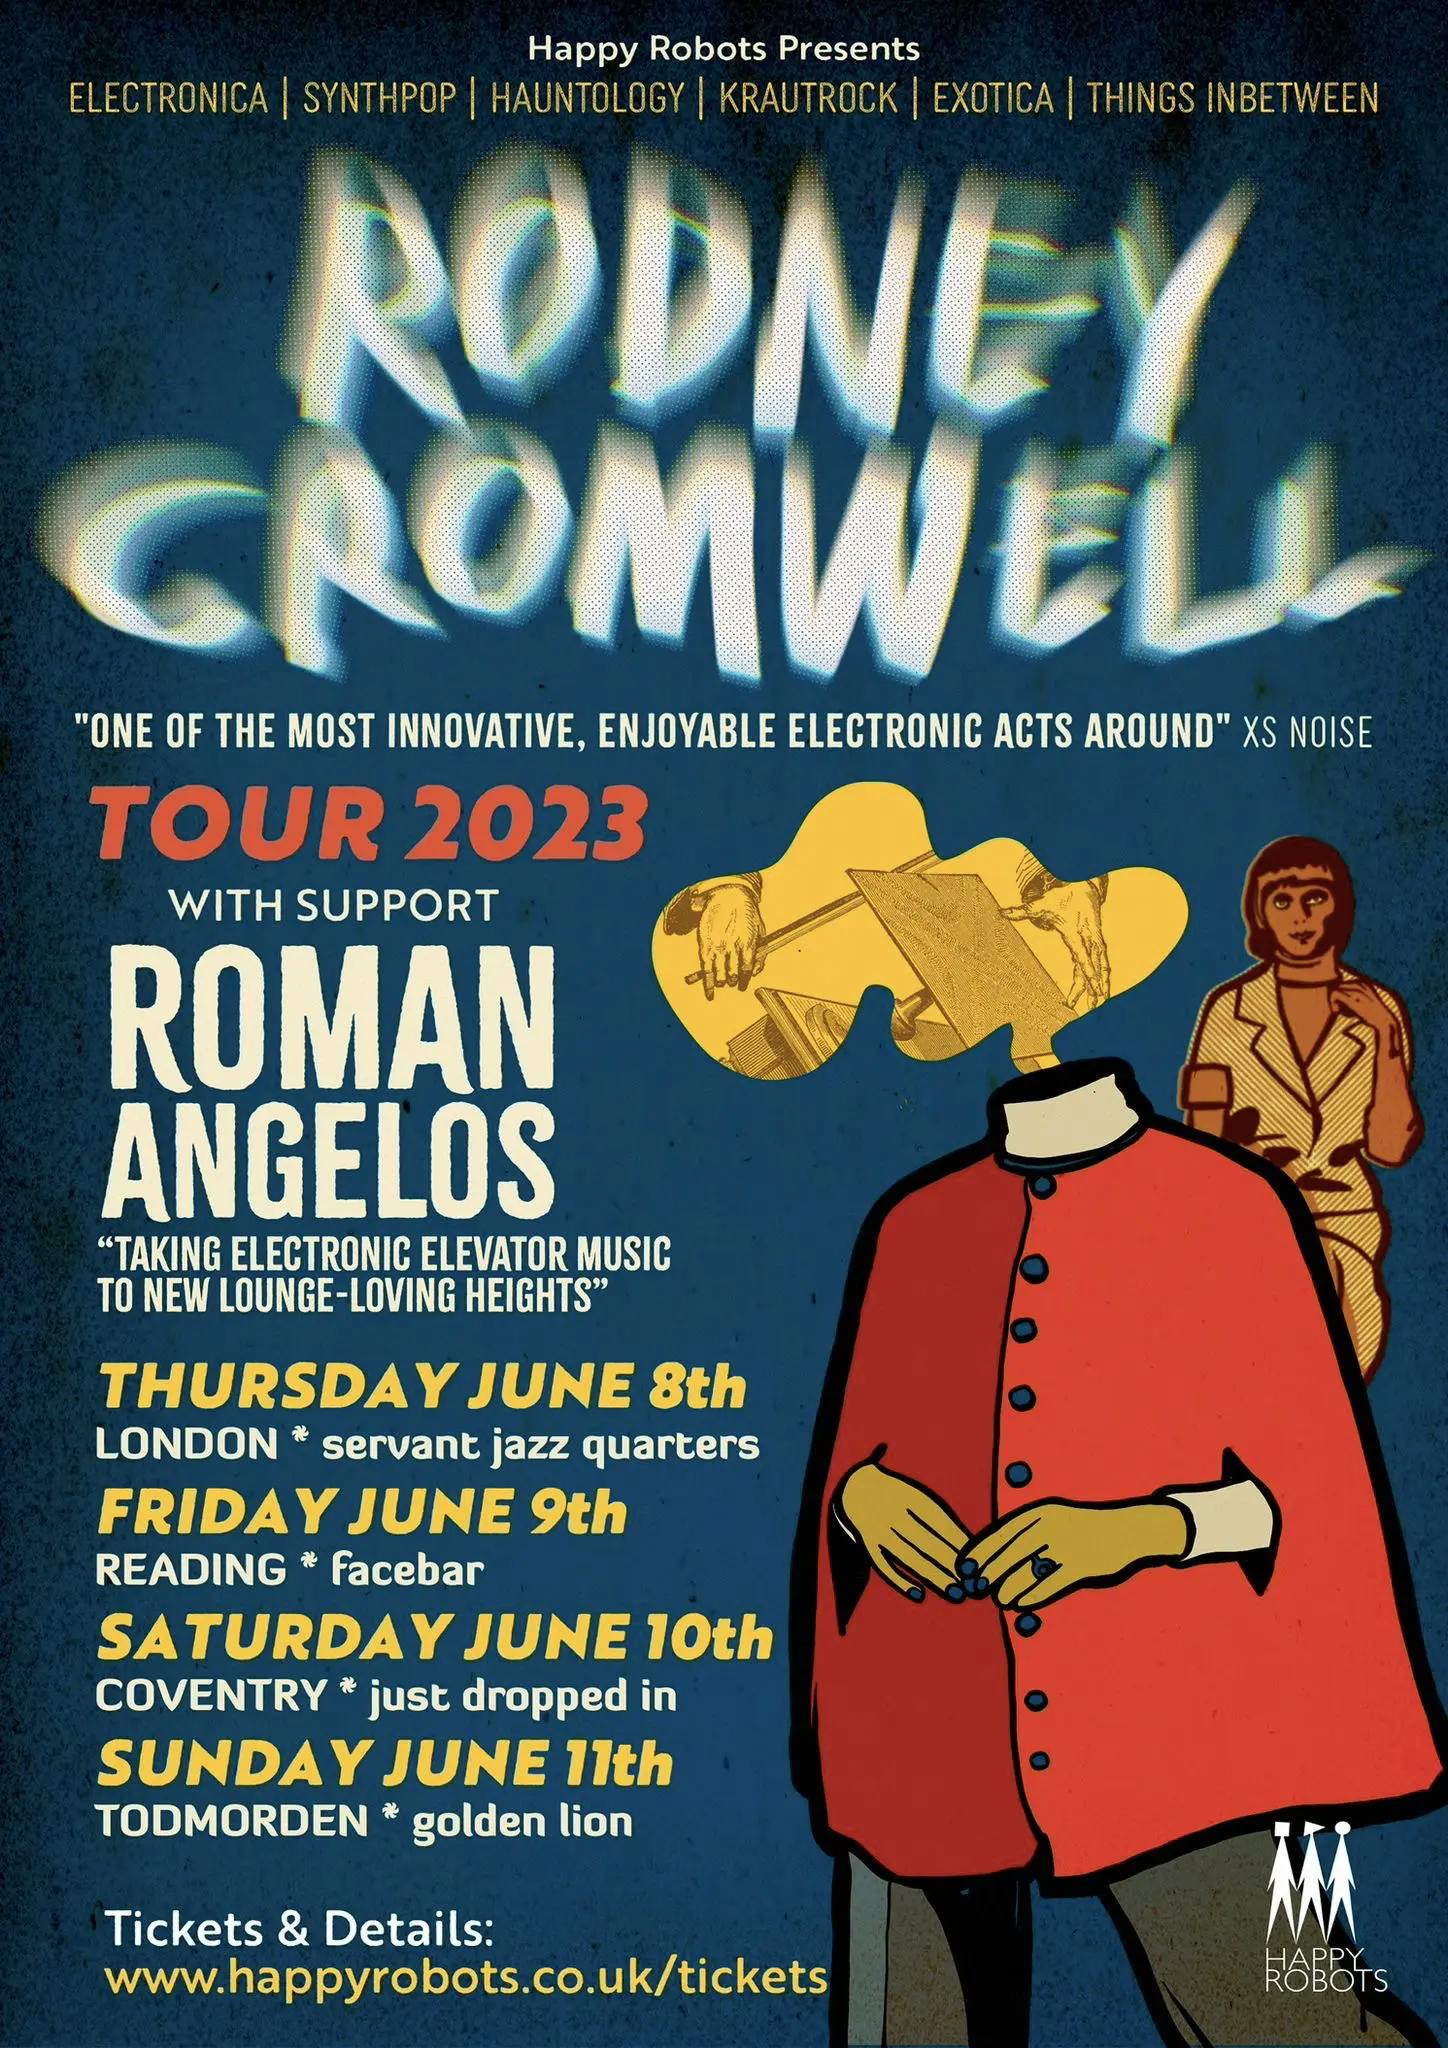 Roman Angelos touring with Rodney Cromwell in June 2023